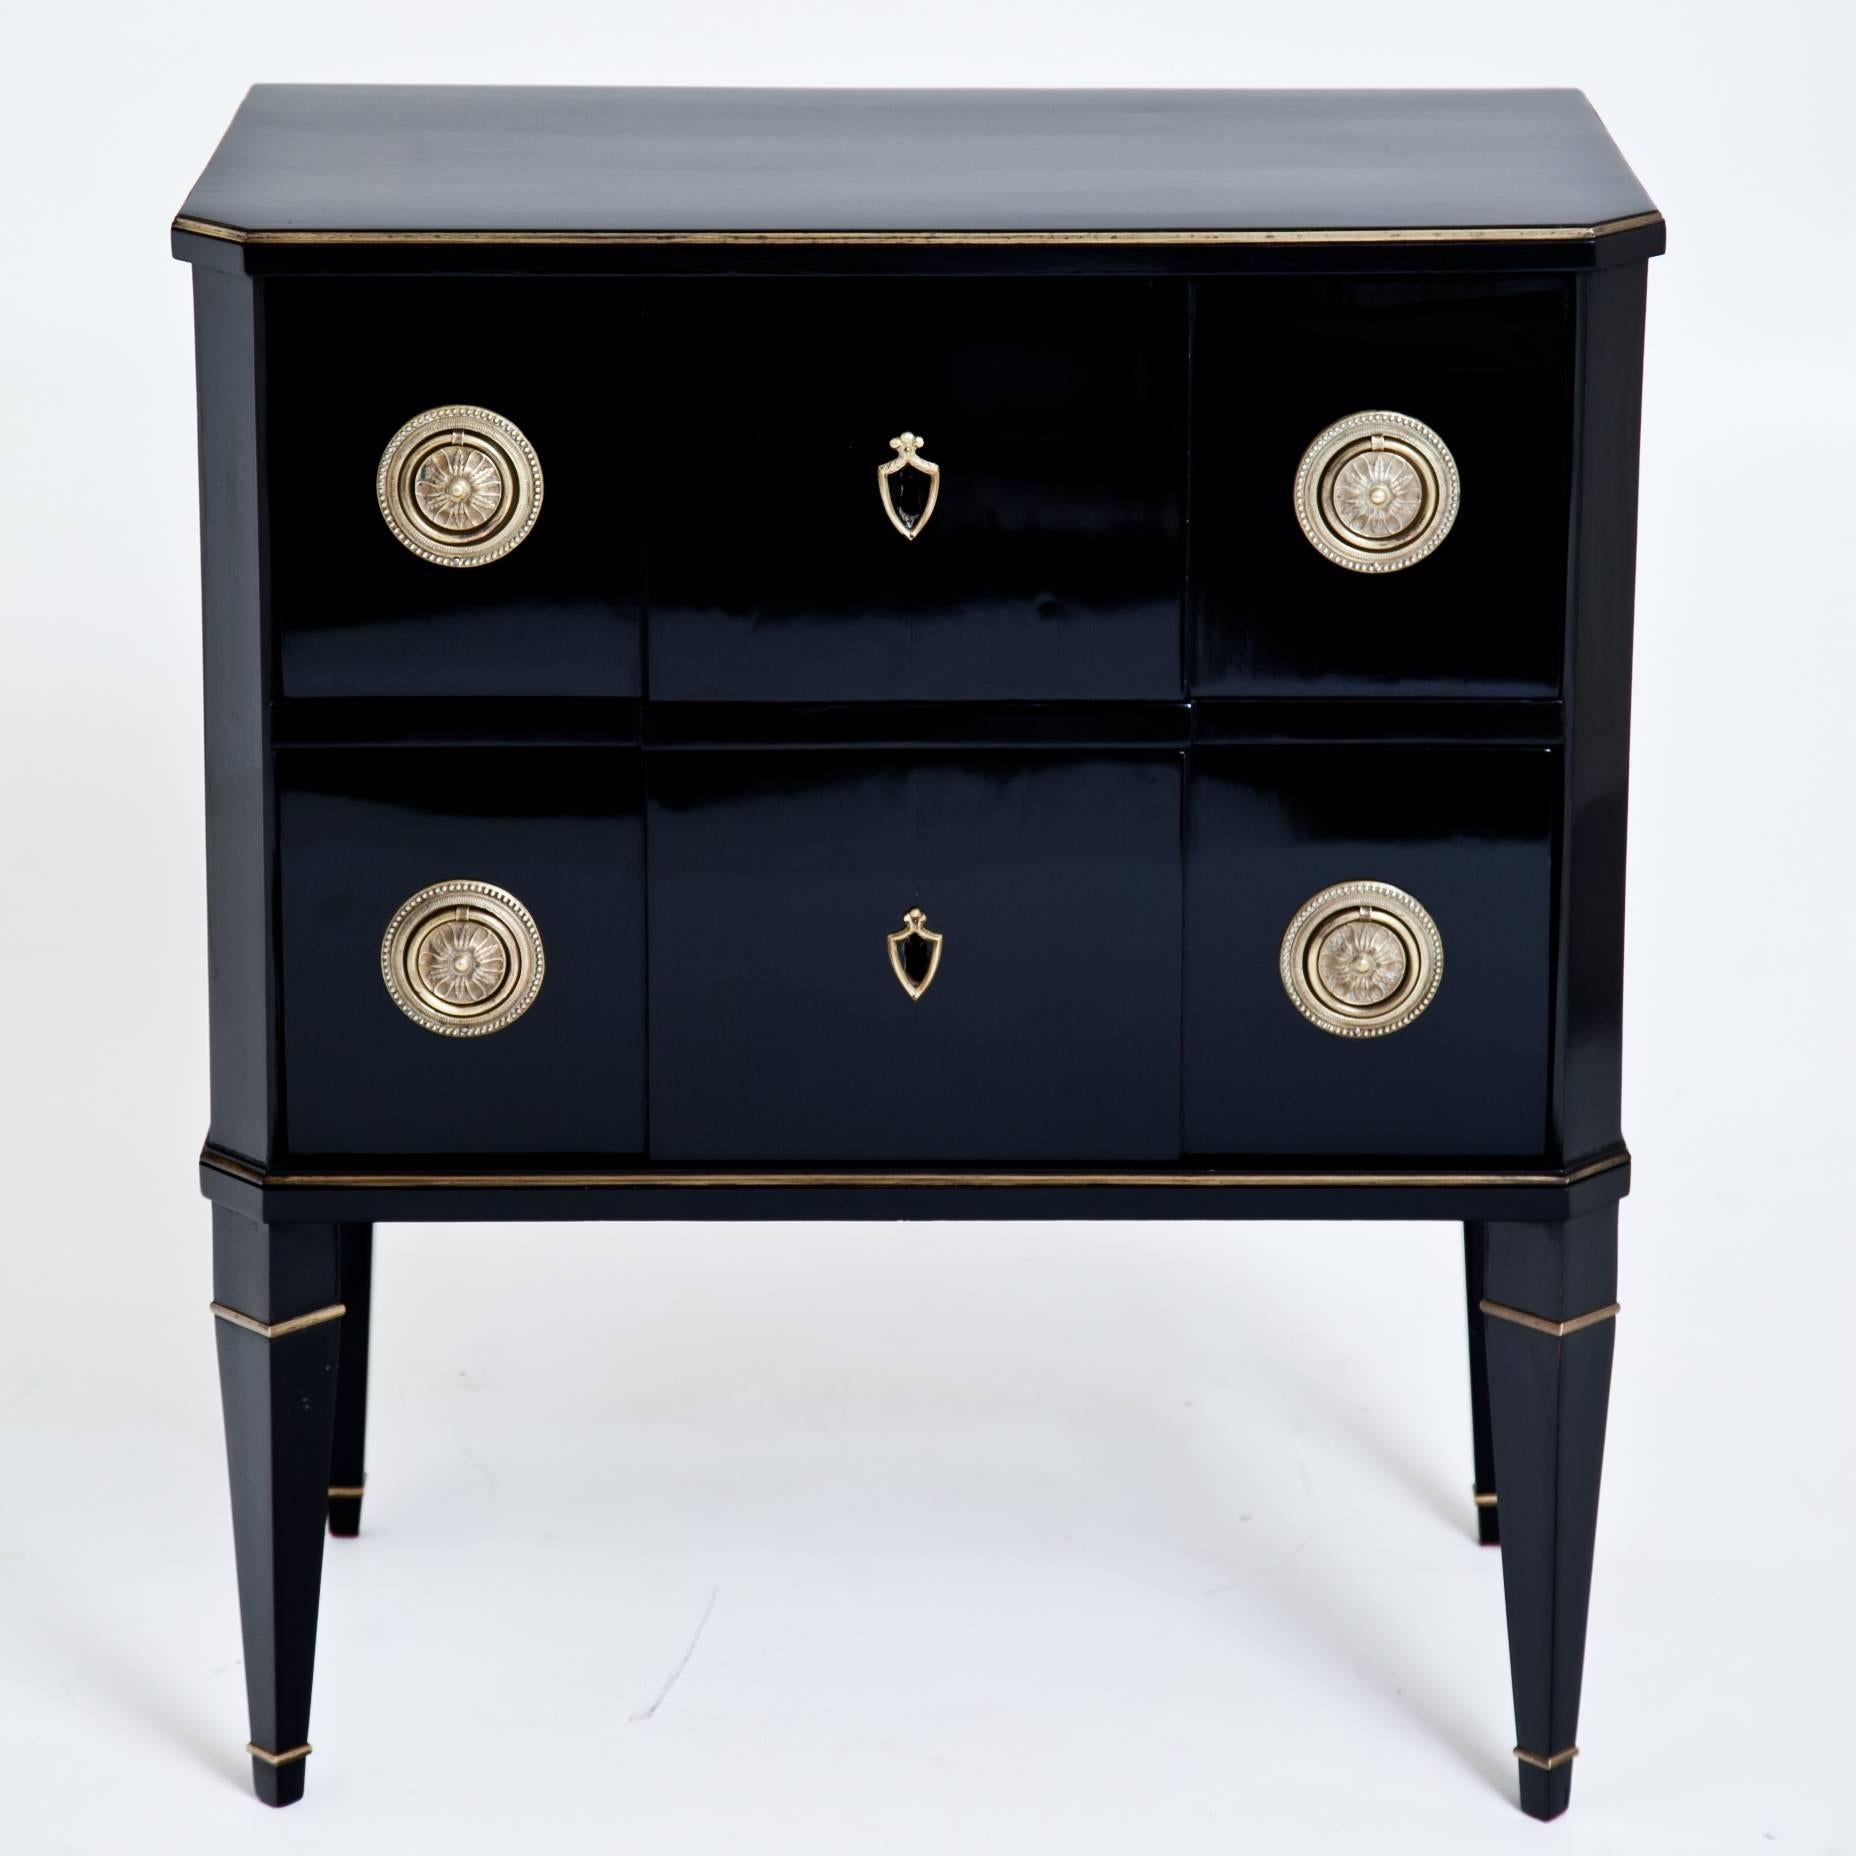 Small black neoclassical chest of drawers on tapered feet with brass details. The ebonized body shows slanted edges and has two drawers with brass fittings. The chest was ebonized later and is in a restored condition.
 